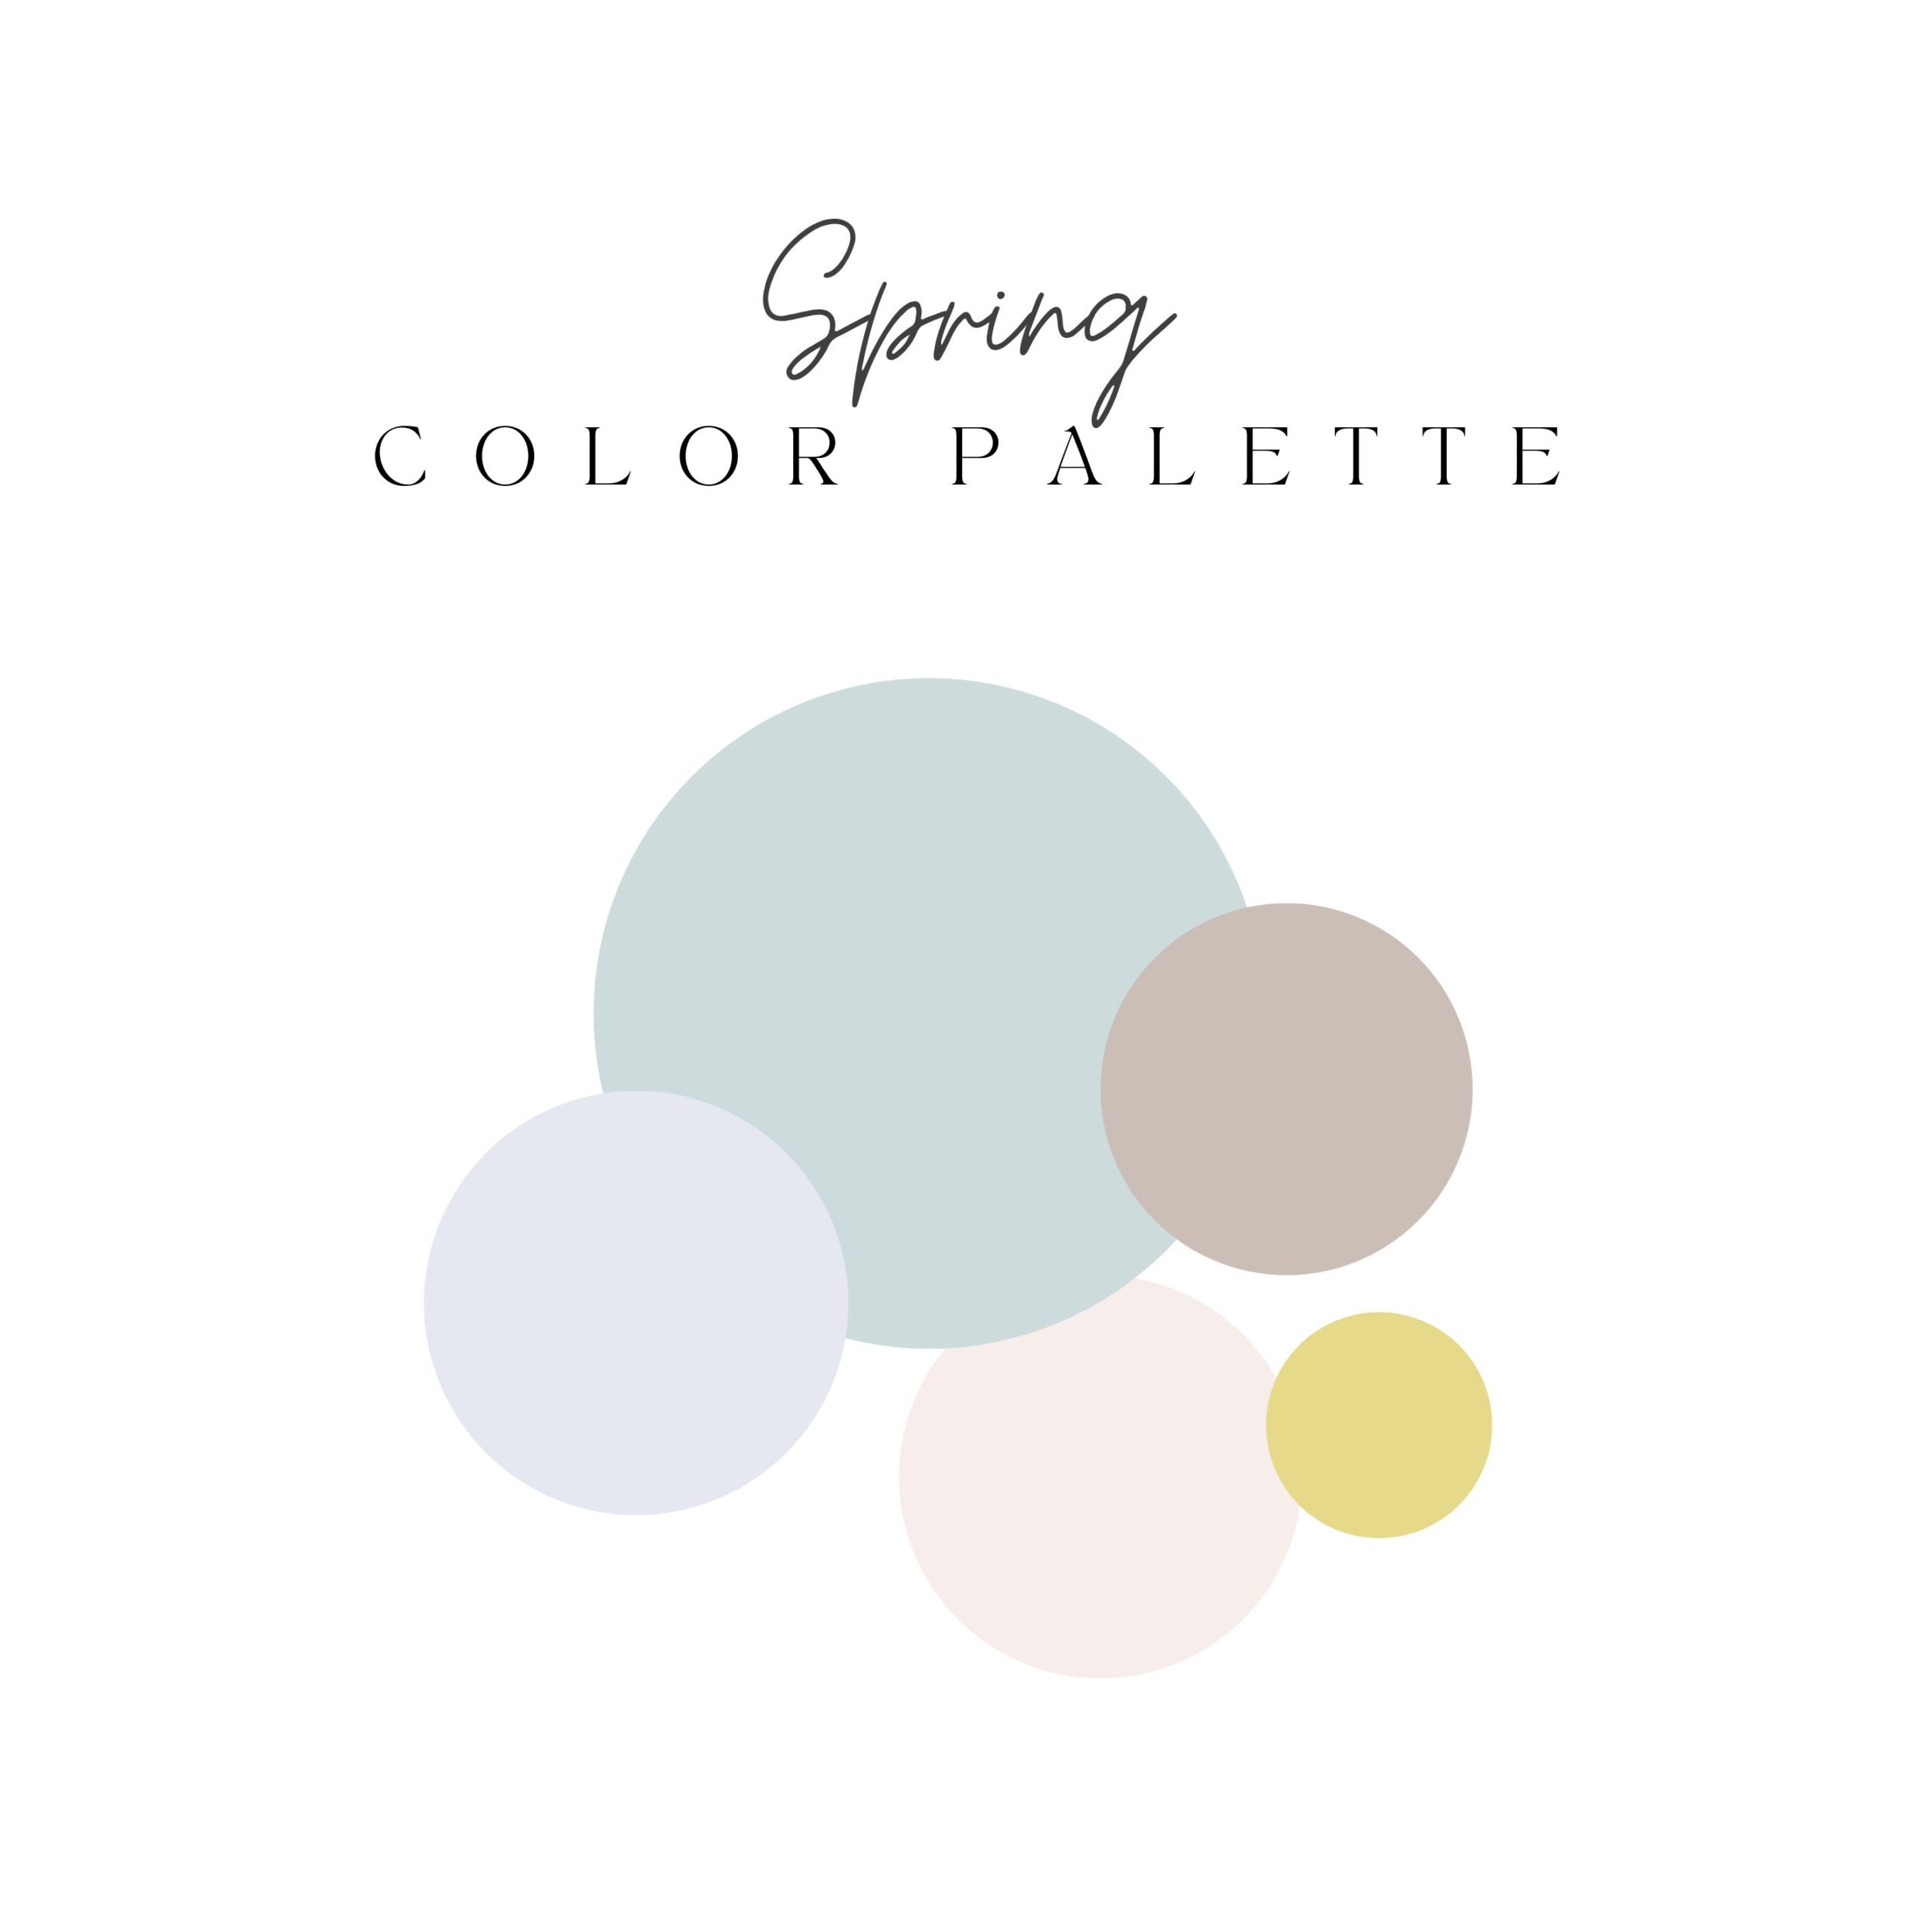 spring color palette for family photo outfits with pastel colors - light teal, purple, pink, and gold 